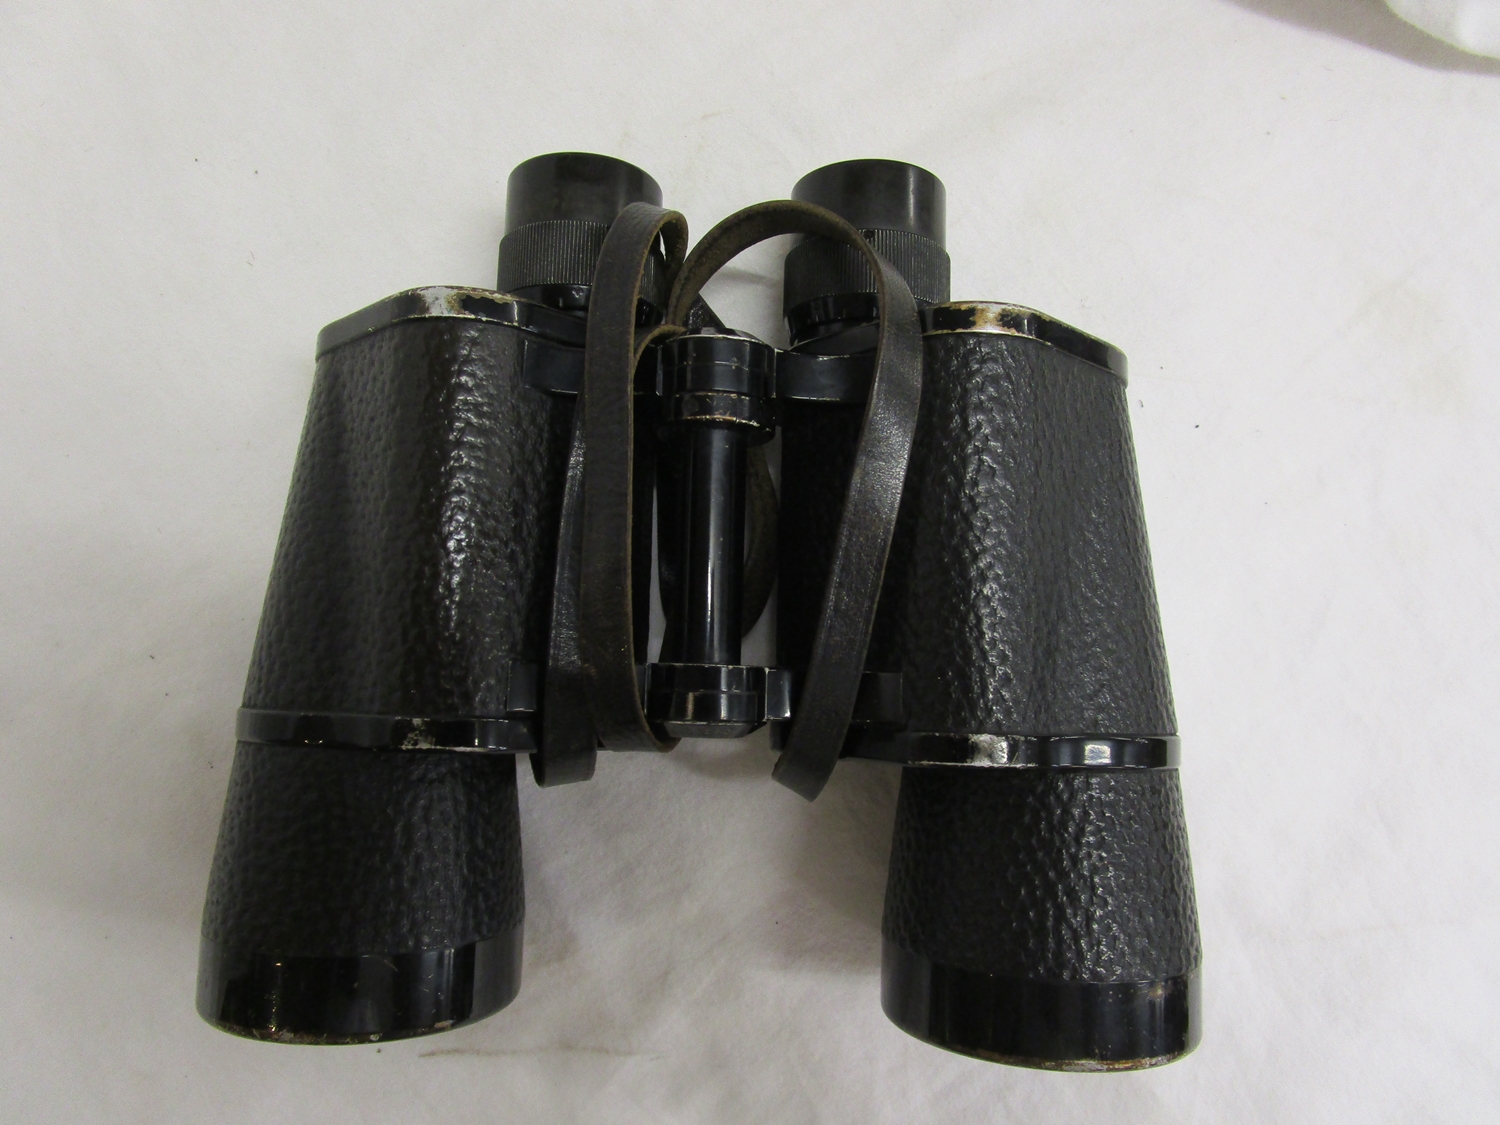 Nazi WWII Carl Zeiss 7x50 binoculars, marked with eagle and swastika - Image 6 of 10